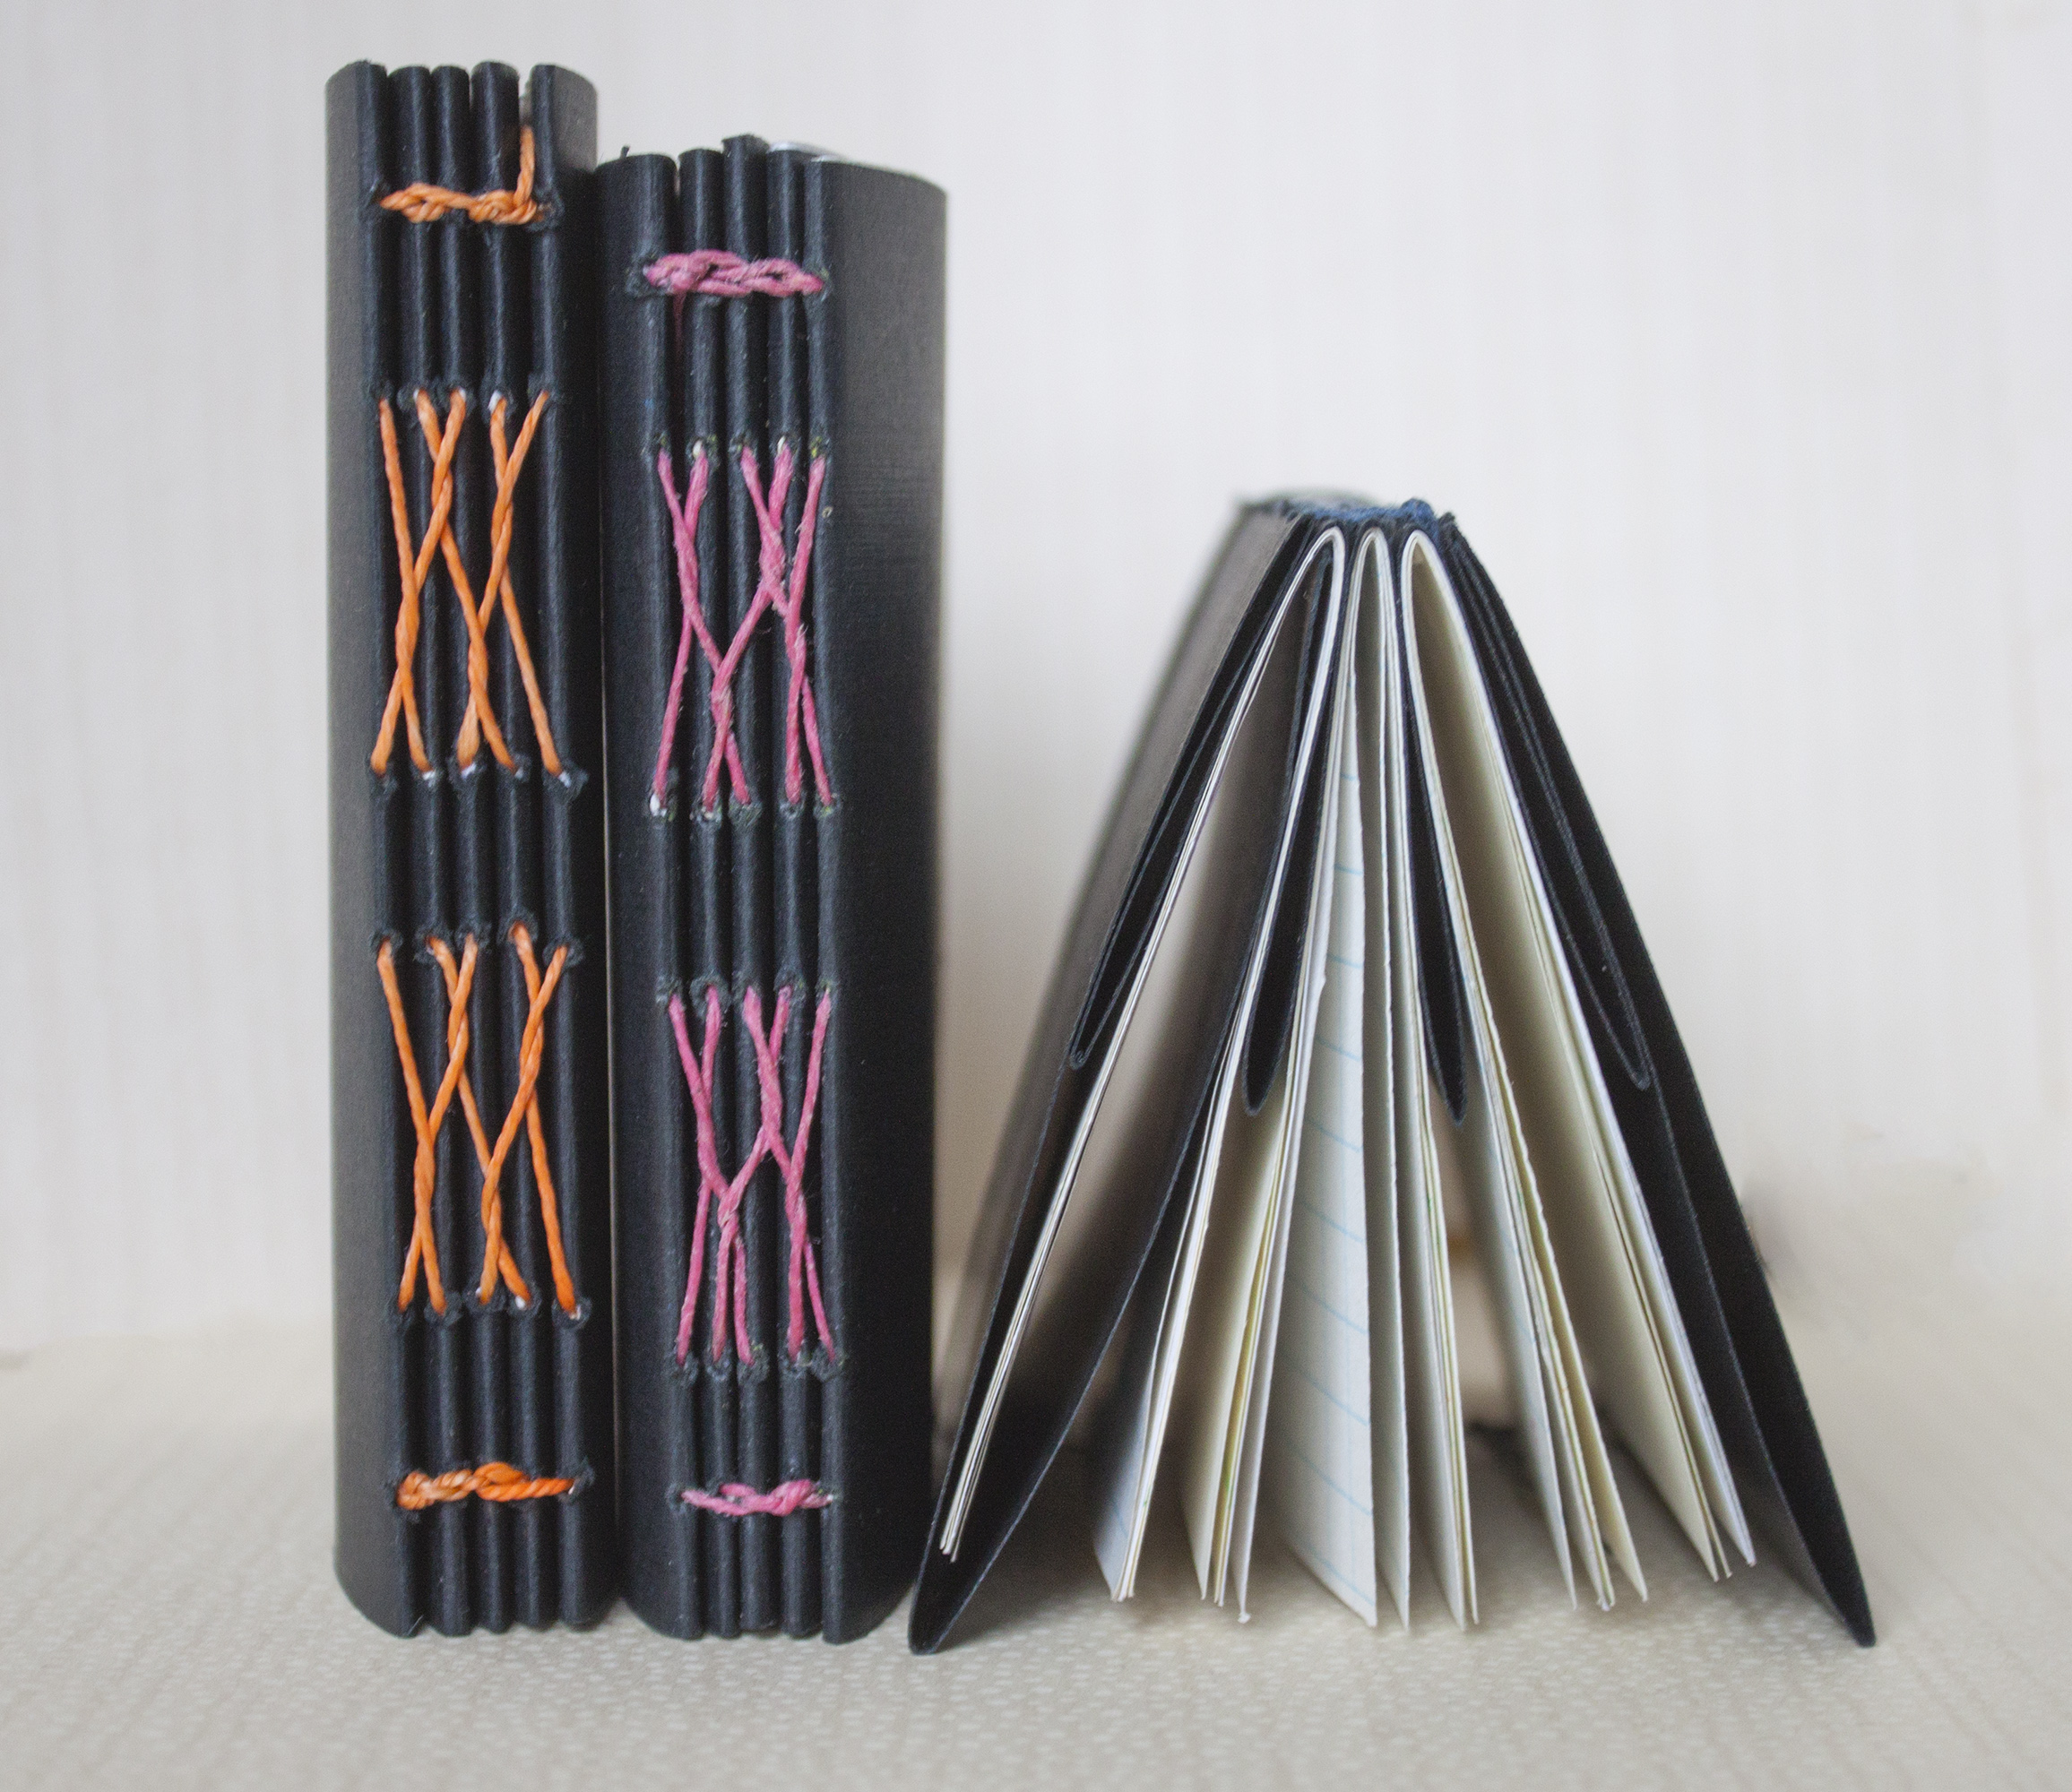 three french-link bound books are standing next to one another. One is face down while the other two are side by side.